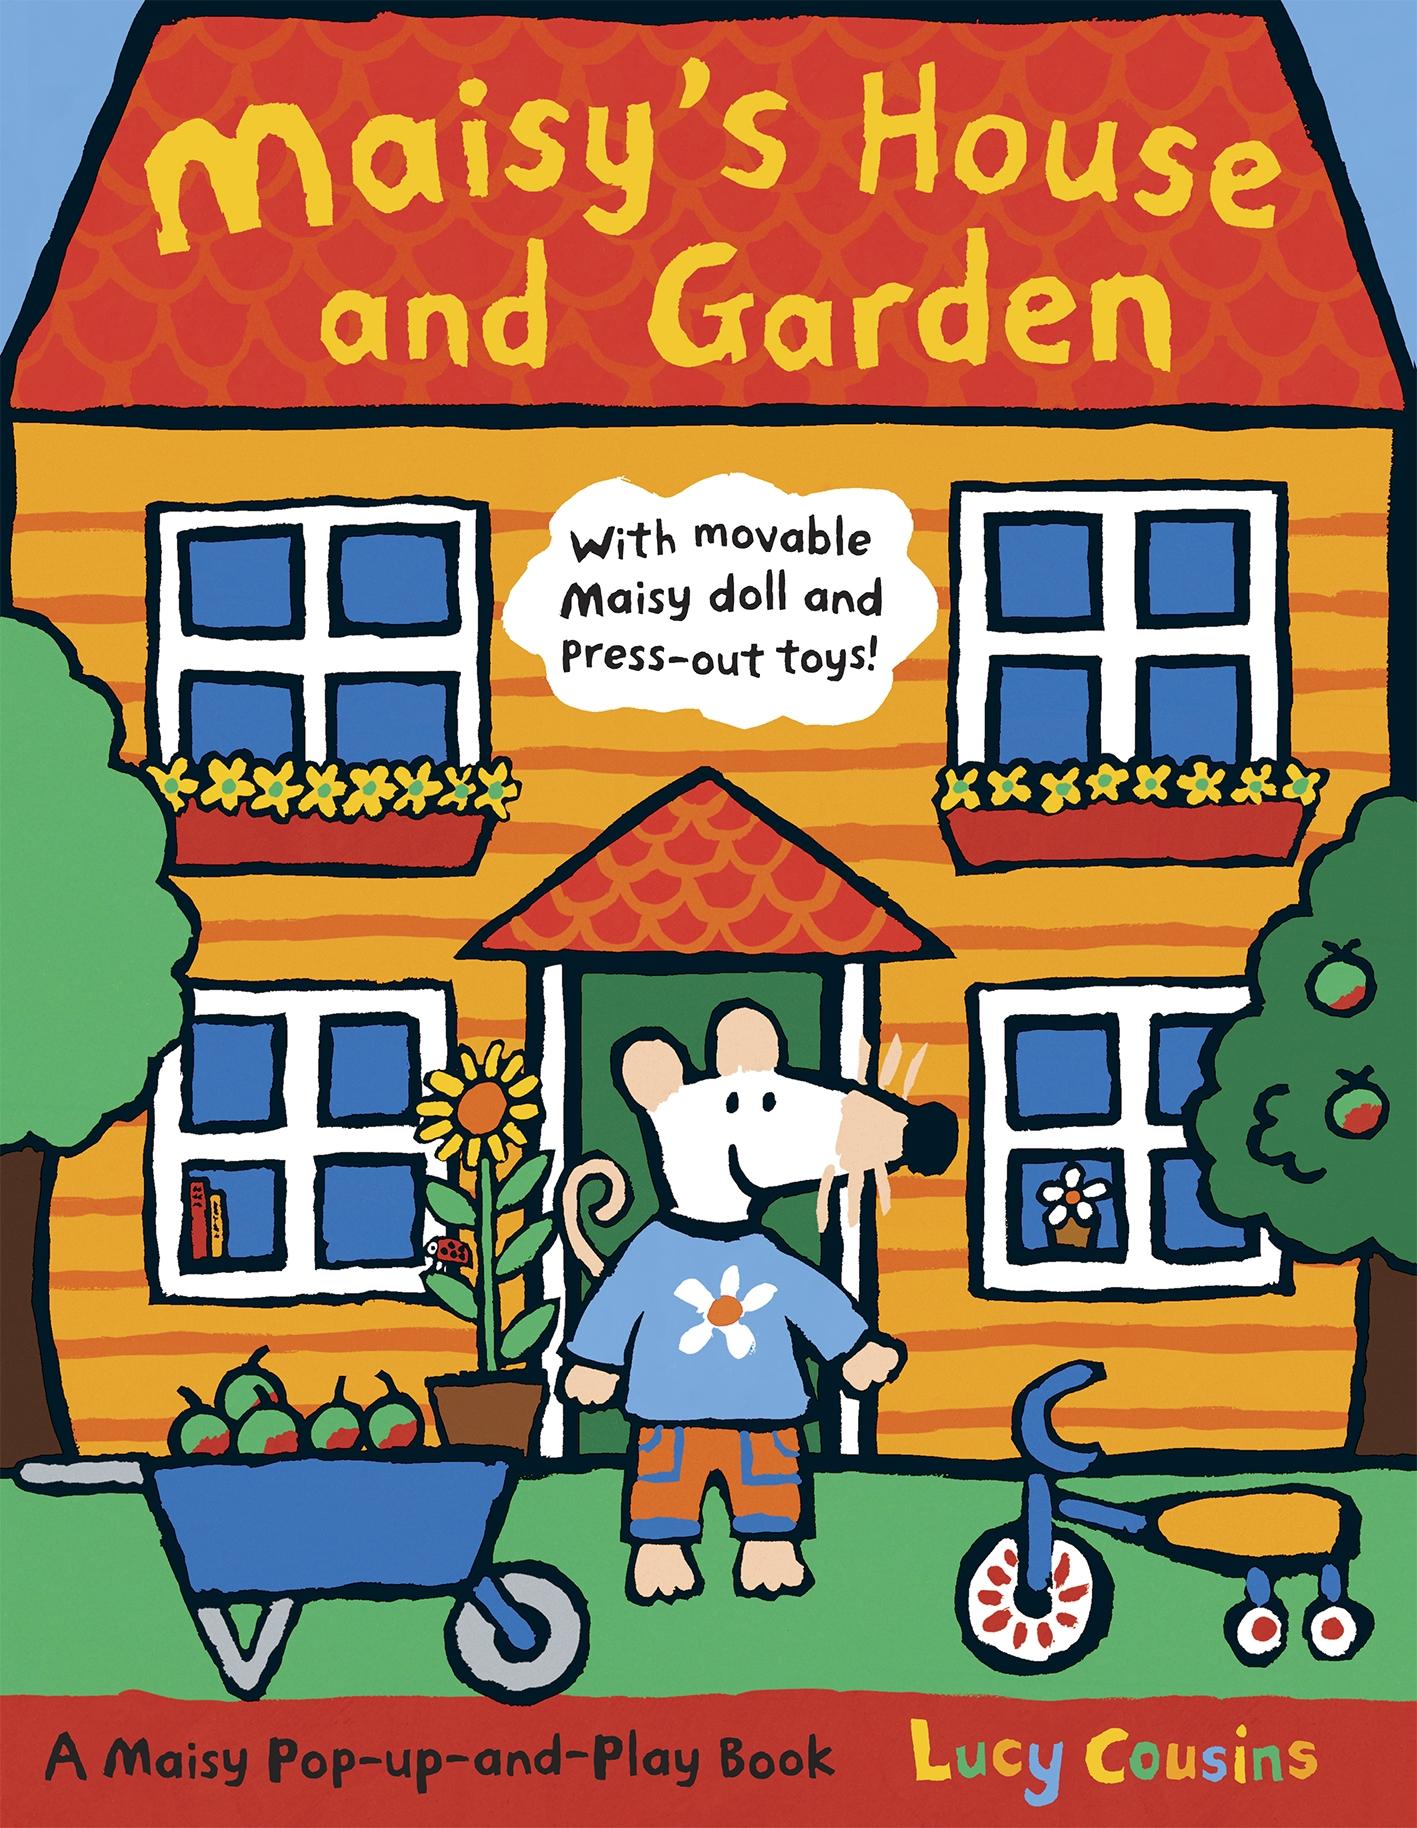 Maisy's House and Garden / A Maisy Pop-up-and-Play Book / Lucy Cousins / Buch / Illustrations / Englisch / 2008 / Walker Books Ltd. / EAN 9781406306613 - Cousins, Lucy